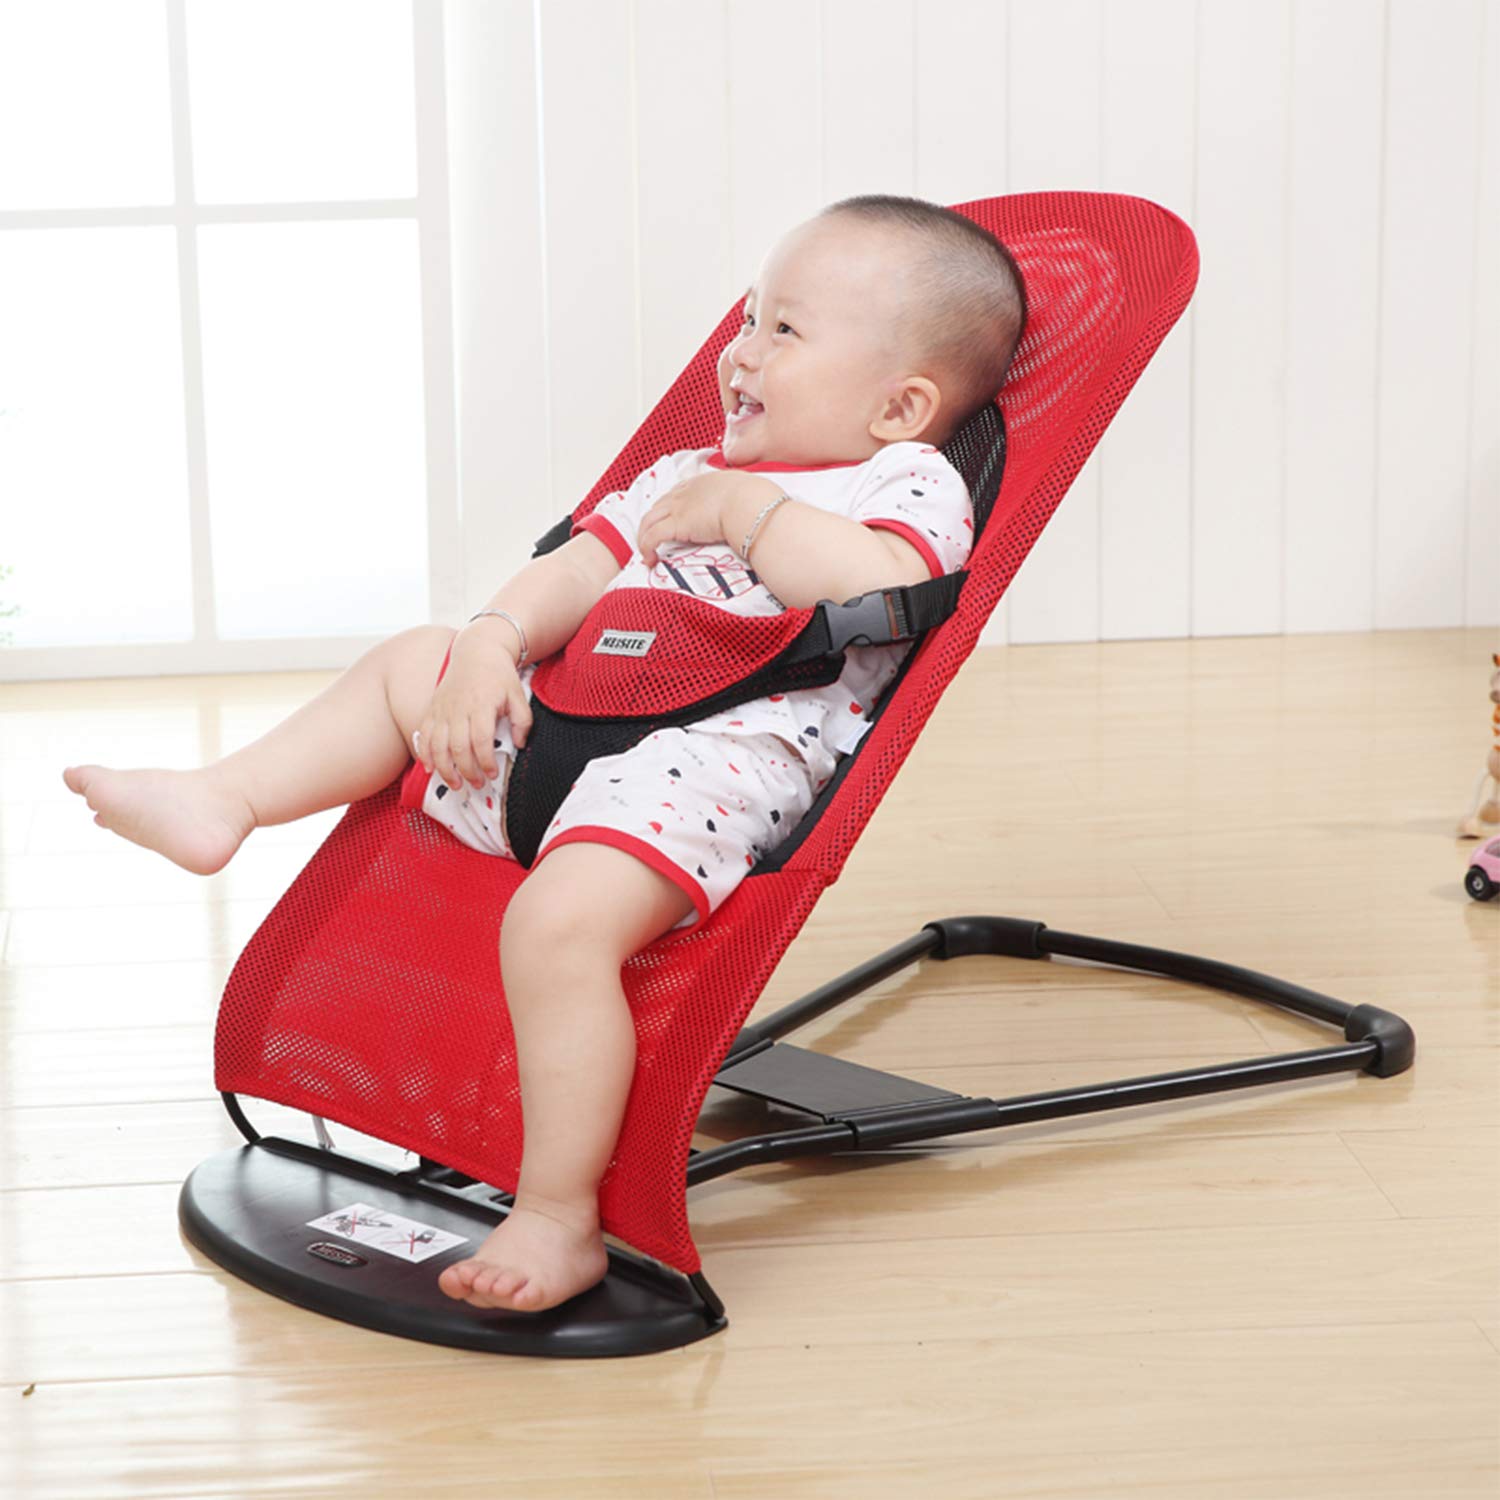 BABY BOUNCING 3 MODE SUPER CHAIR